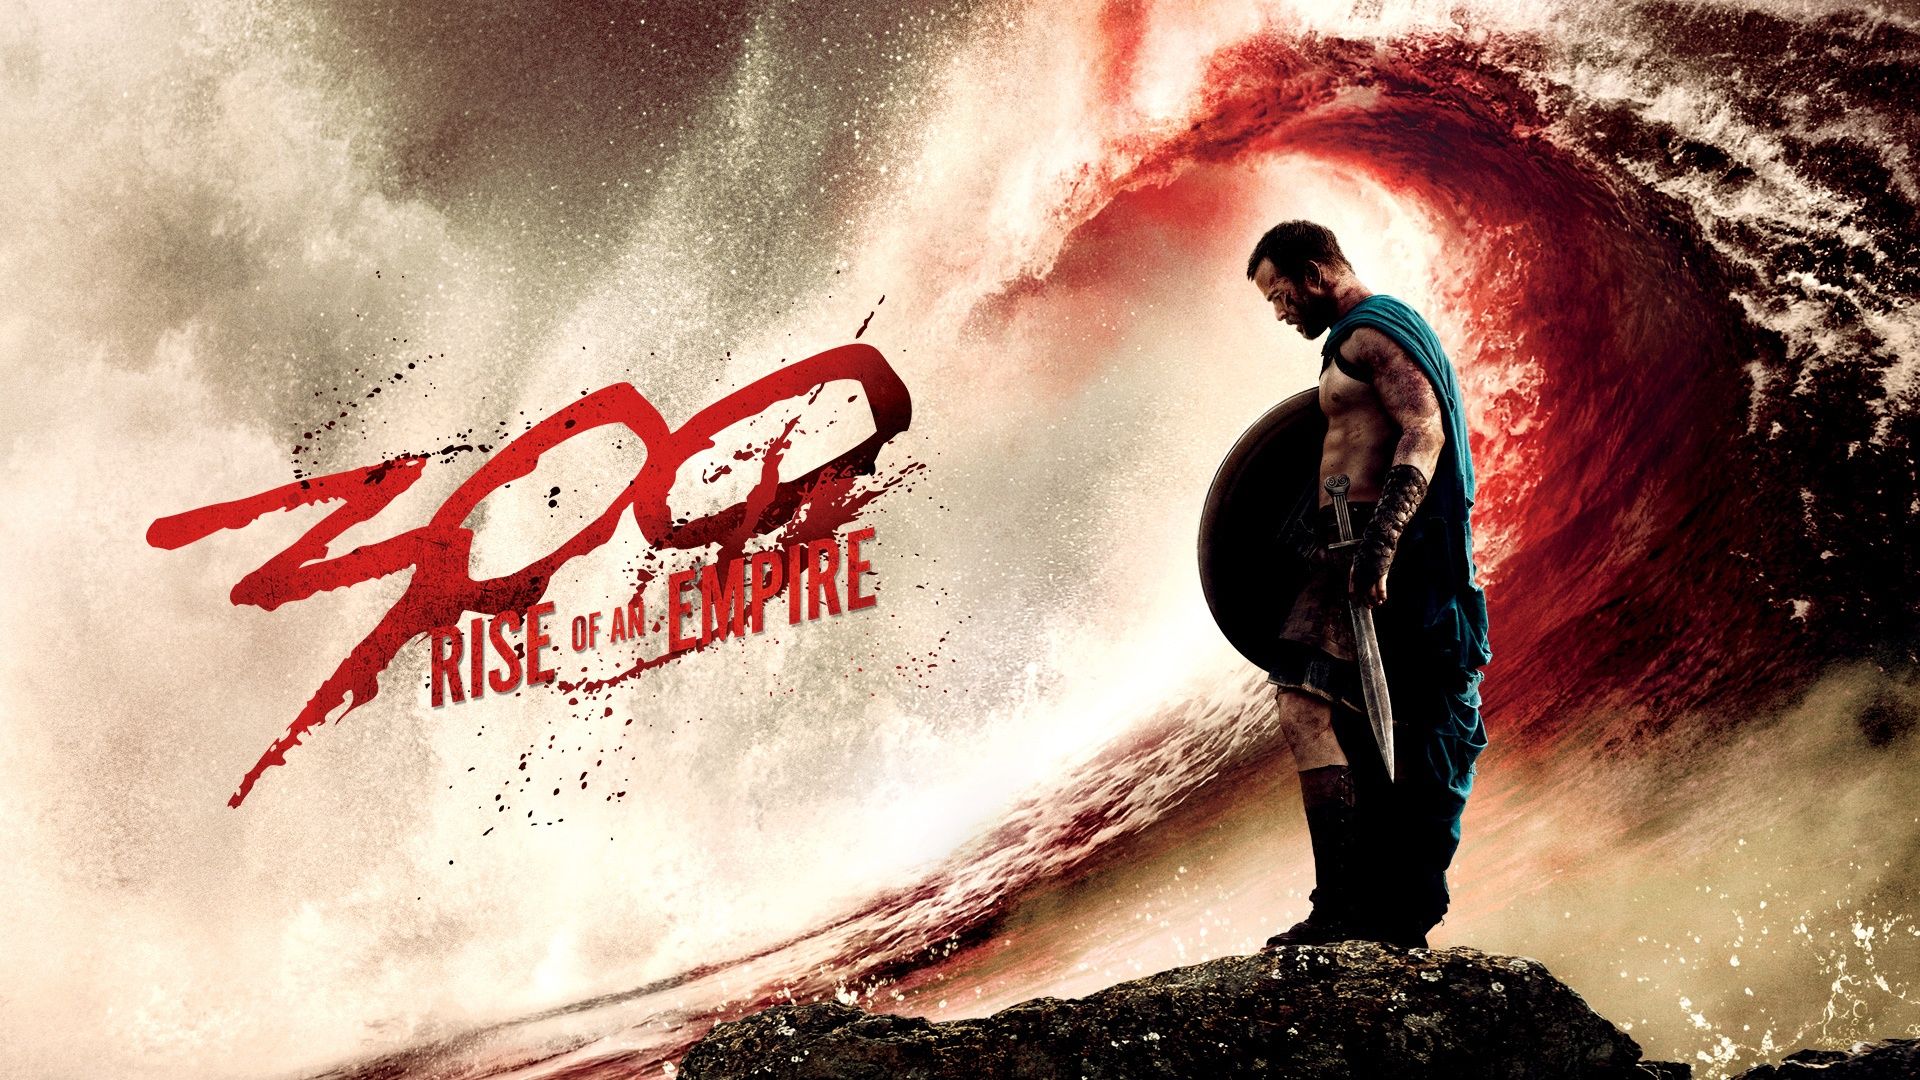 HD wallpaper, Of, An, Rise, Empire, Movie, 300